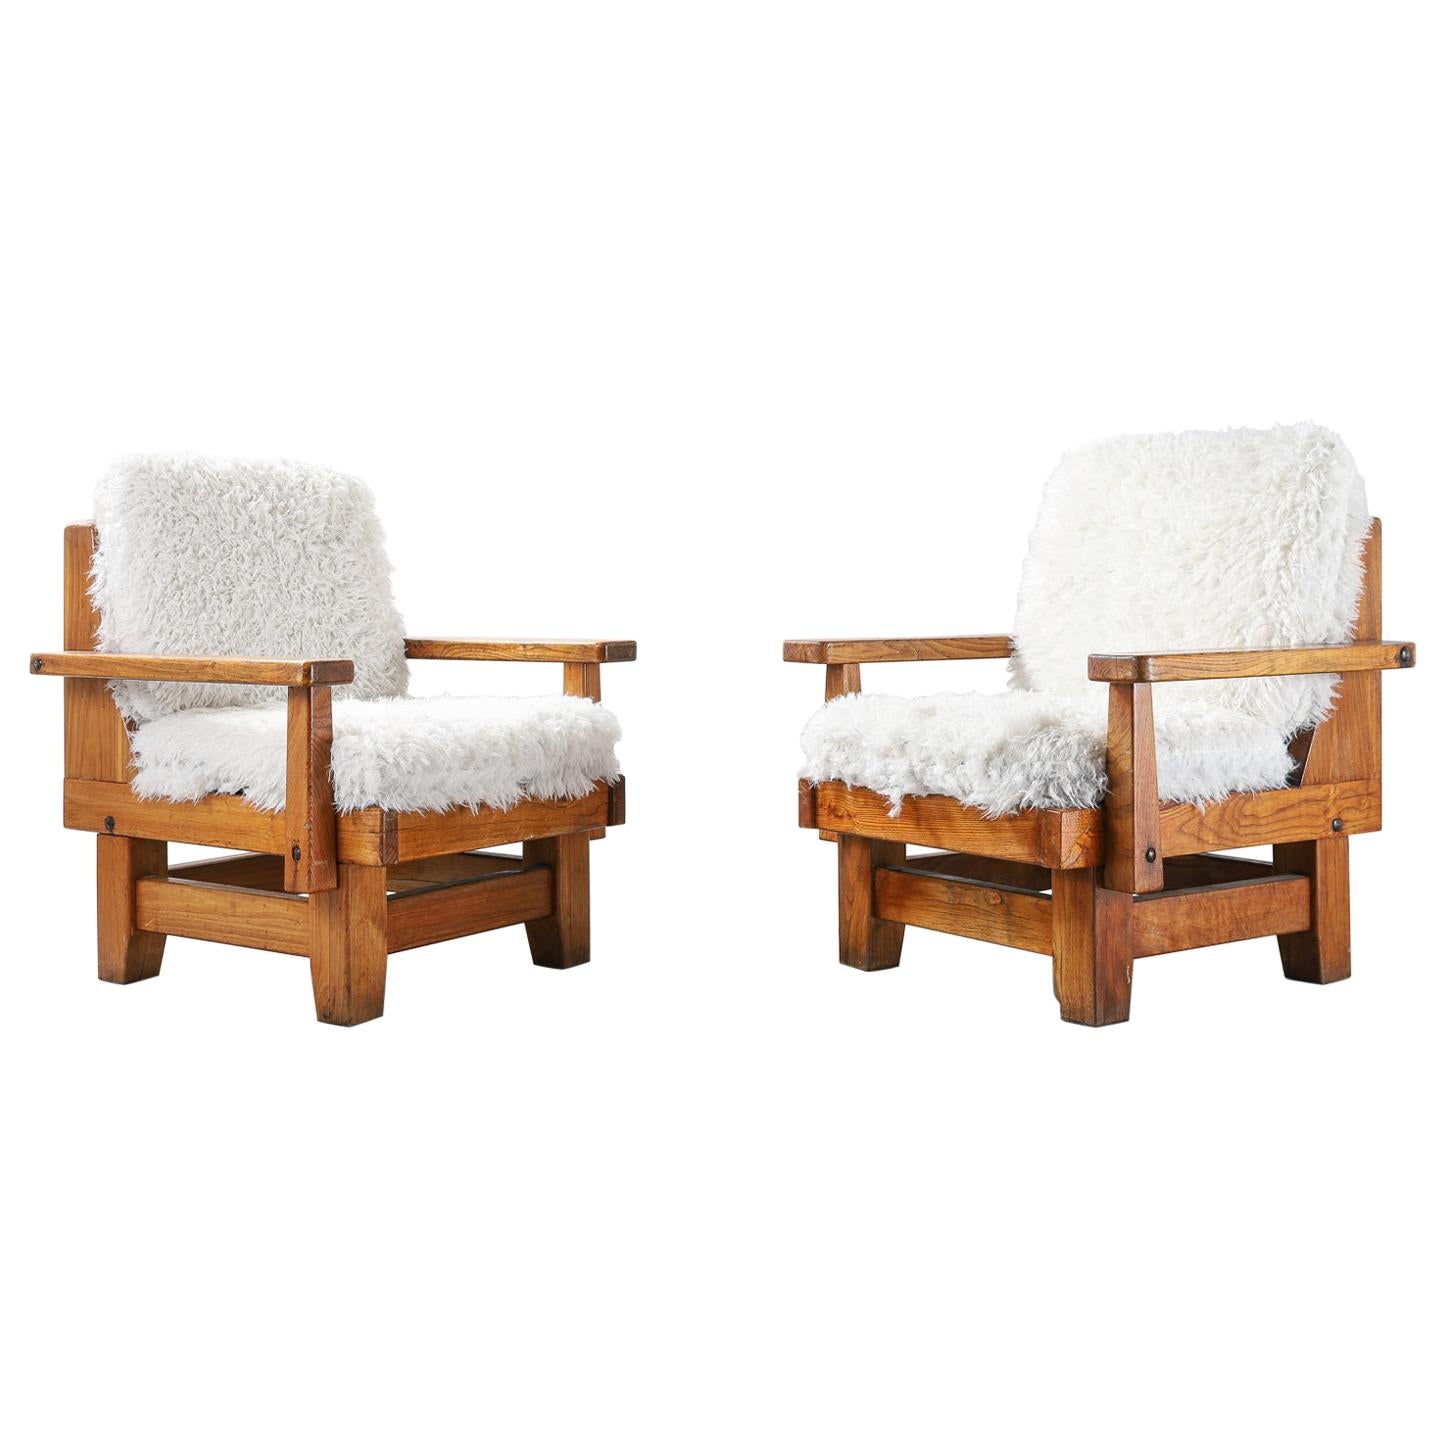 Pair of Northern Spanish Armchairs with Sheepskin Upholstered Cushions